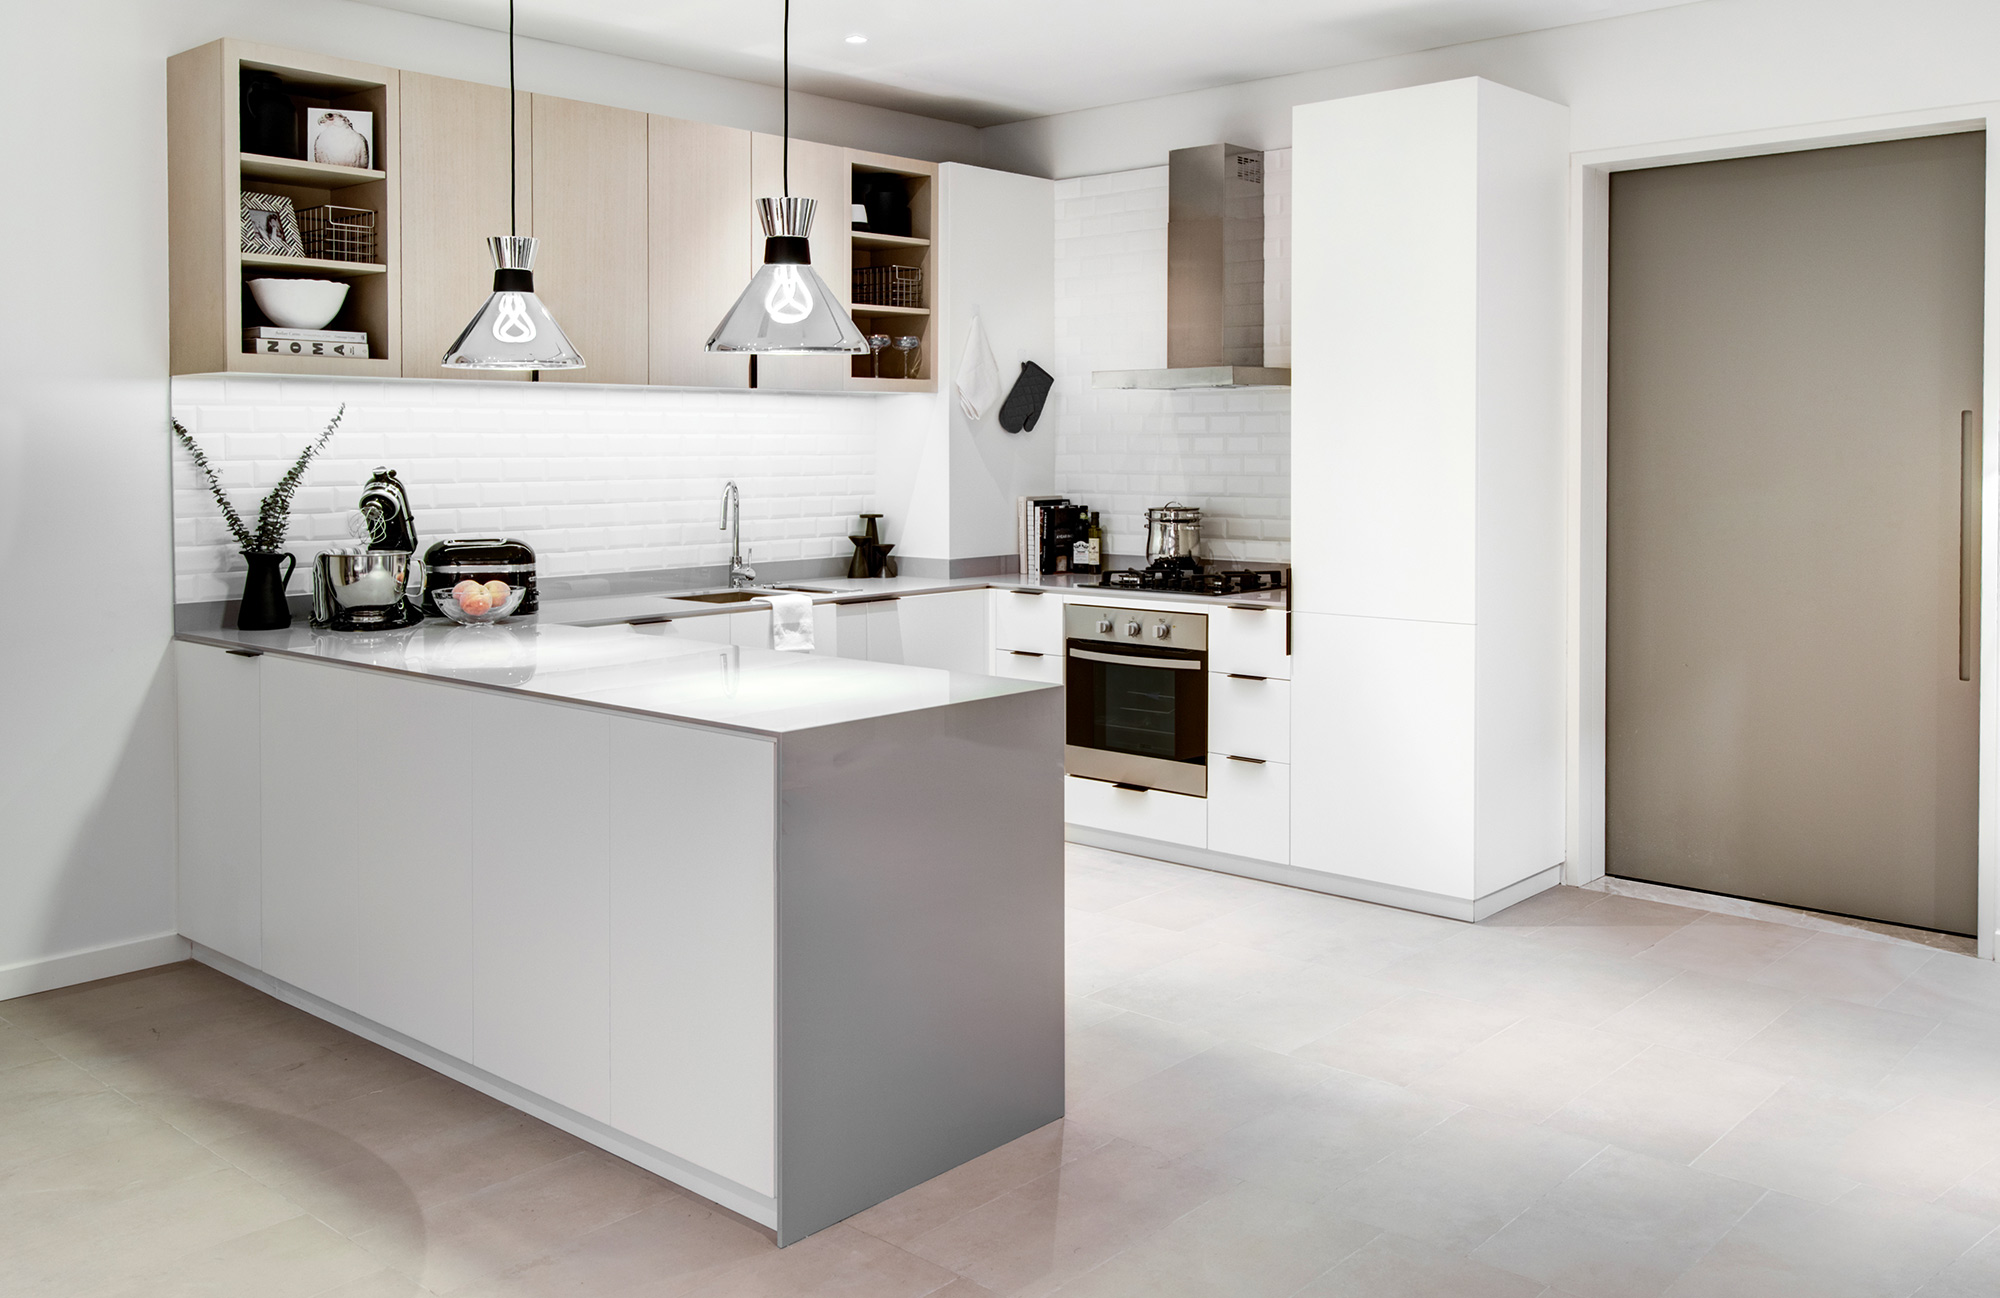 Image of Belgravia Heights I Show Apartment Kitchen in Dekton for the stunning kitchens of a residential tower in Dubai - Cosentino